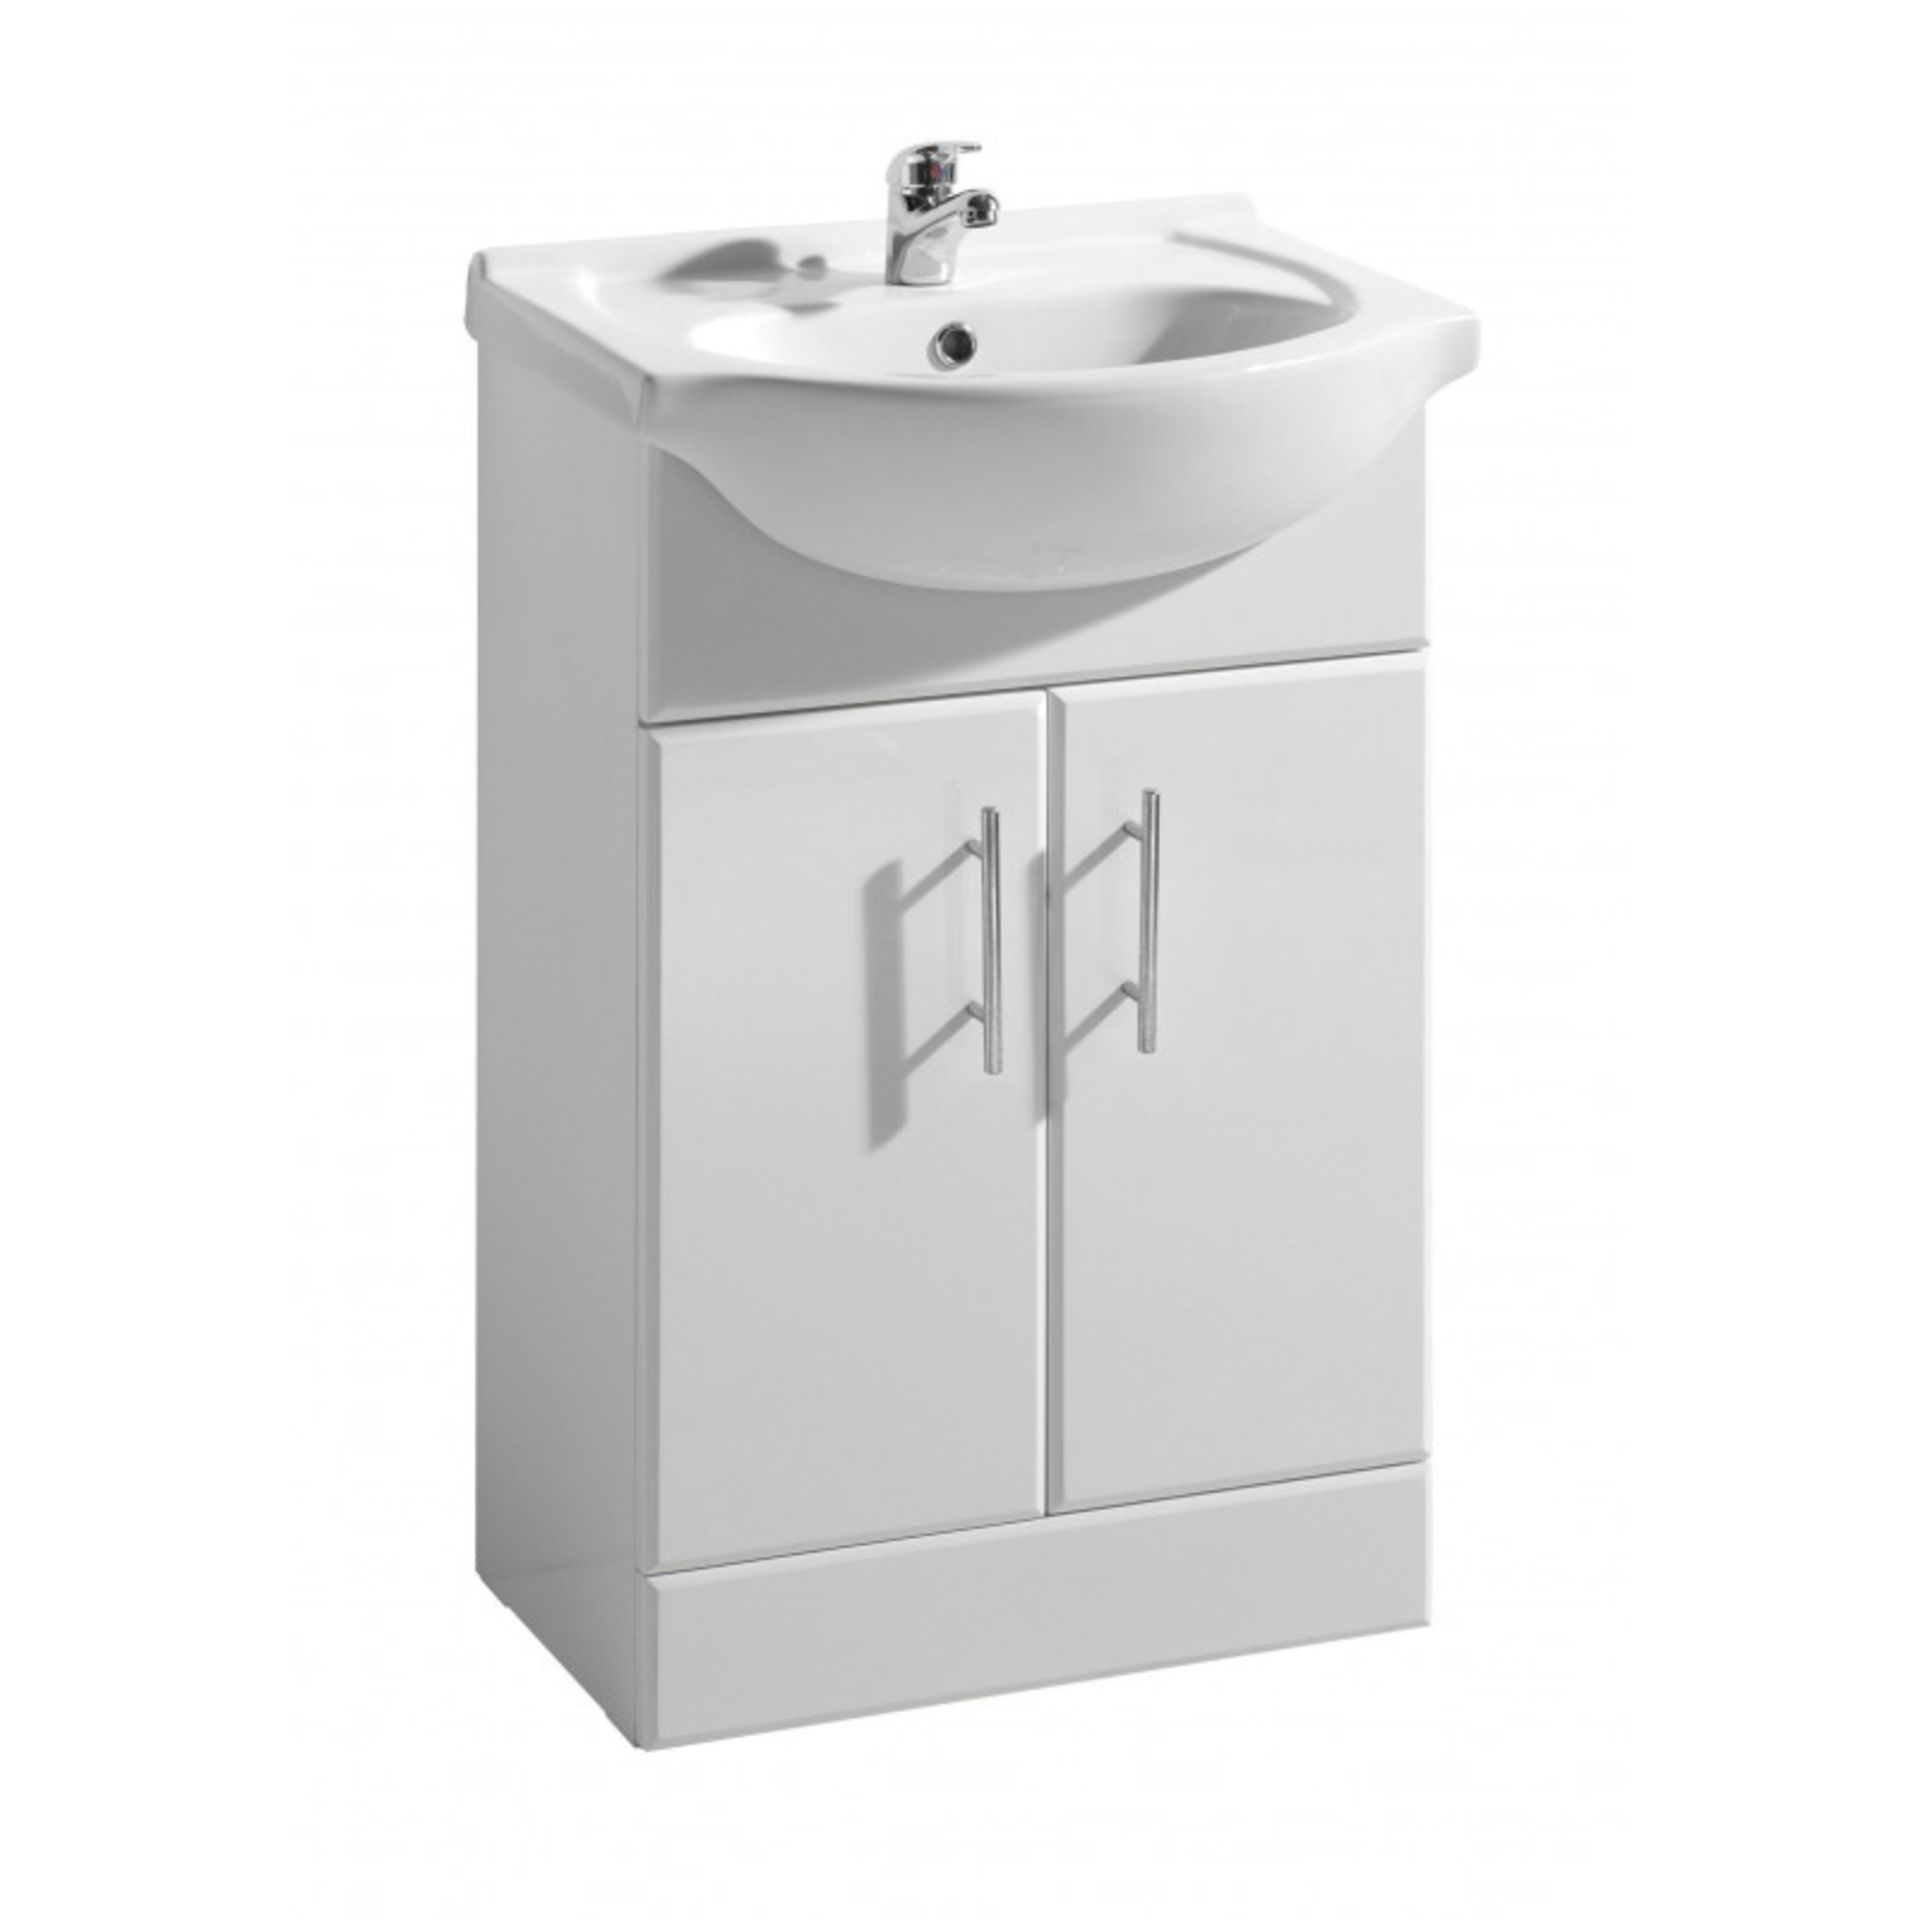 NEW (F182) Vista 550mm Cabinet with Basin White Gloss. RRP £343. The Vista 550mm Cabinet with... - Image 2 of 2